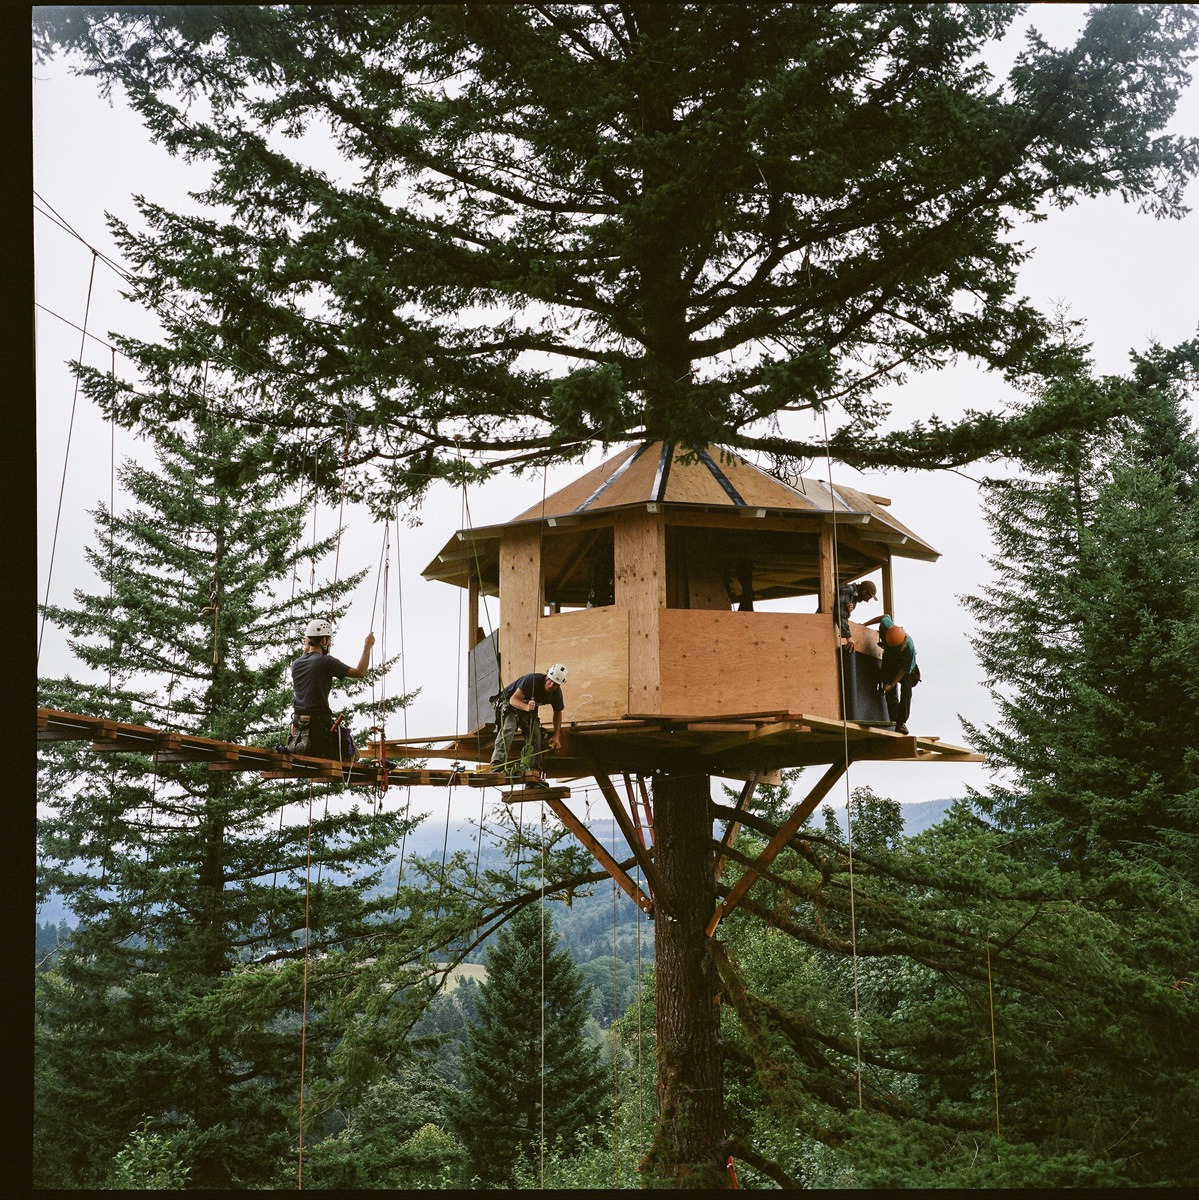 Treehouse under construction